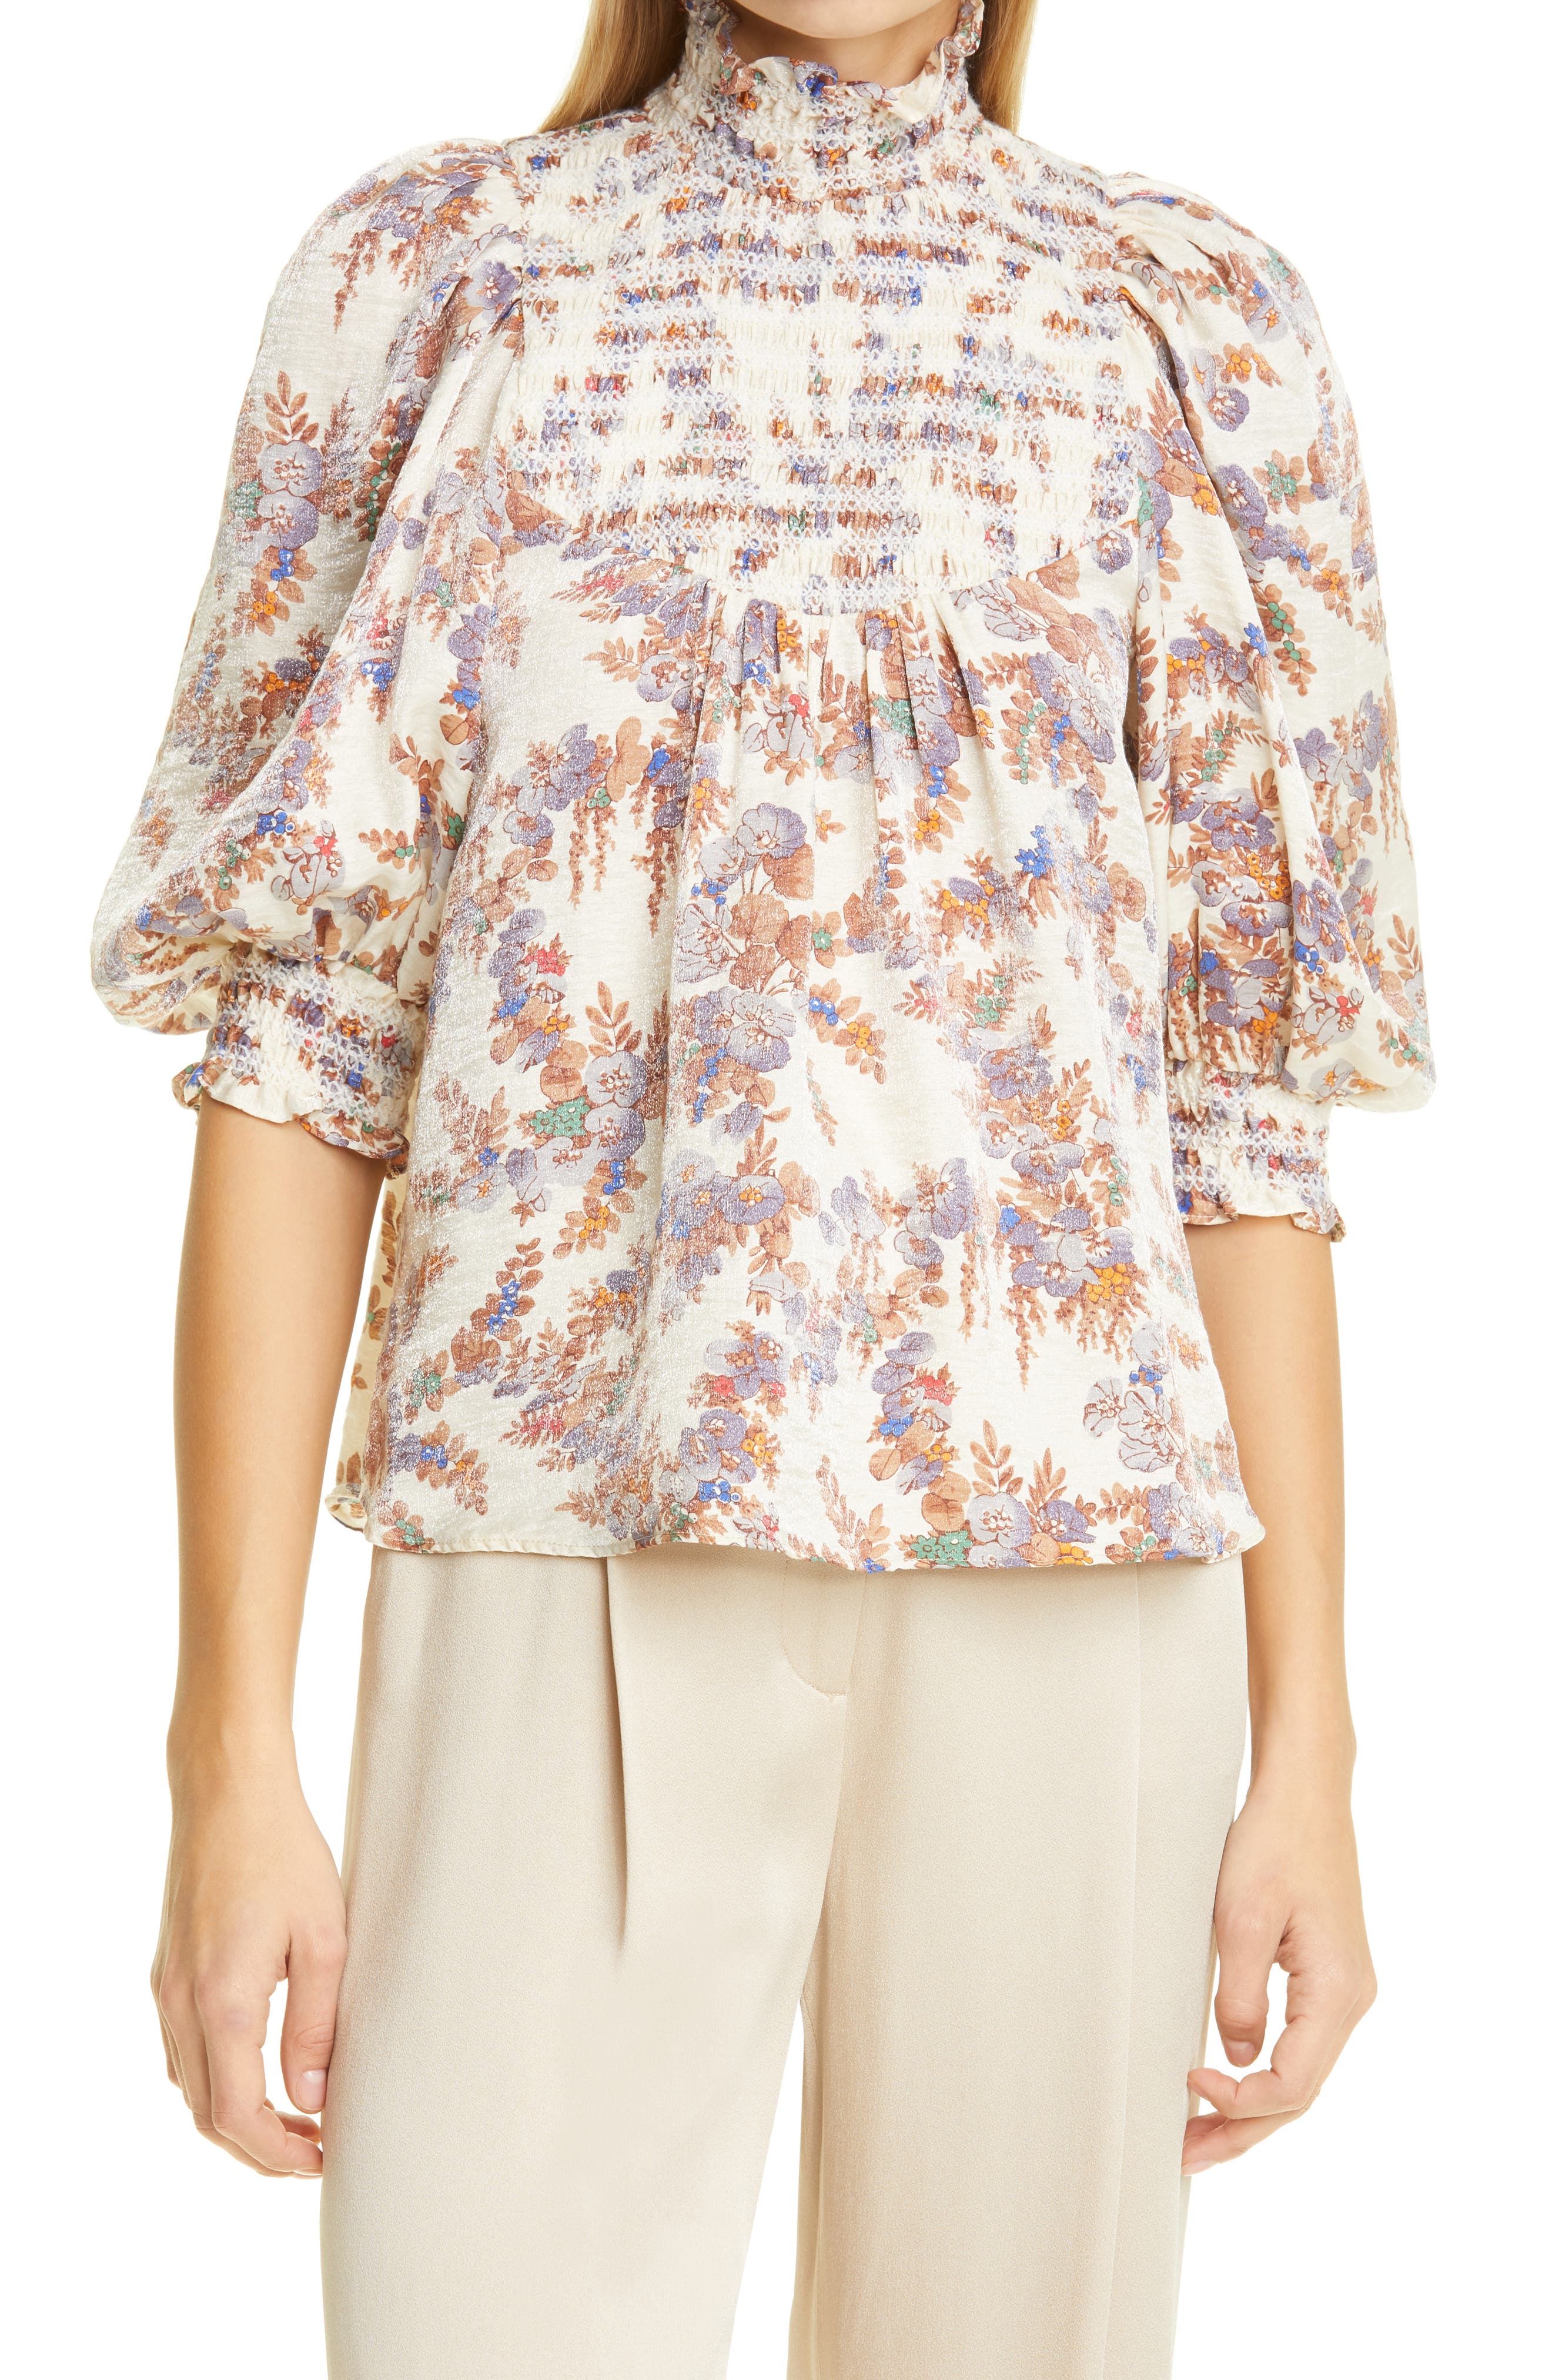 BYTIMO SMOCKED FLORAL PRINT TOP,7020507148831